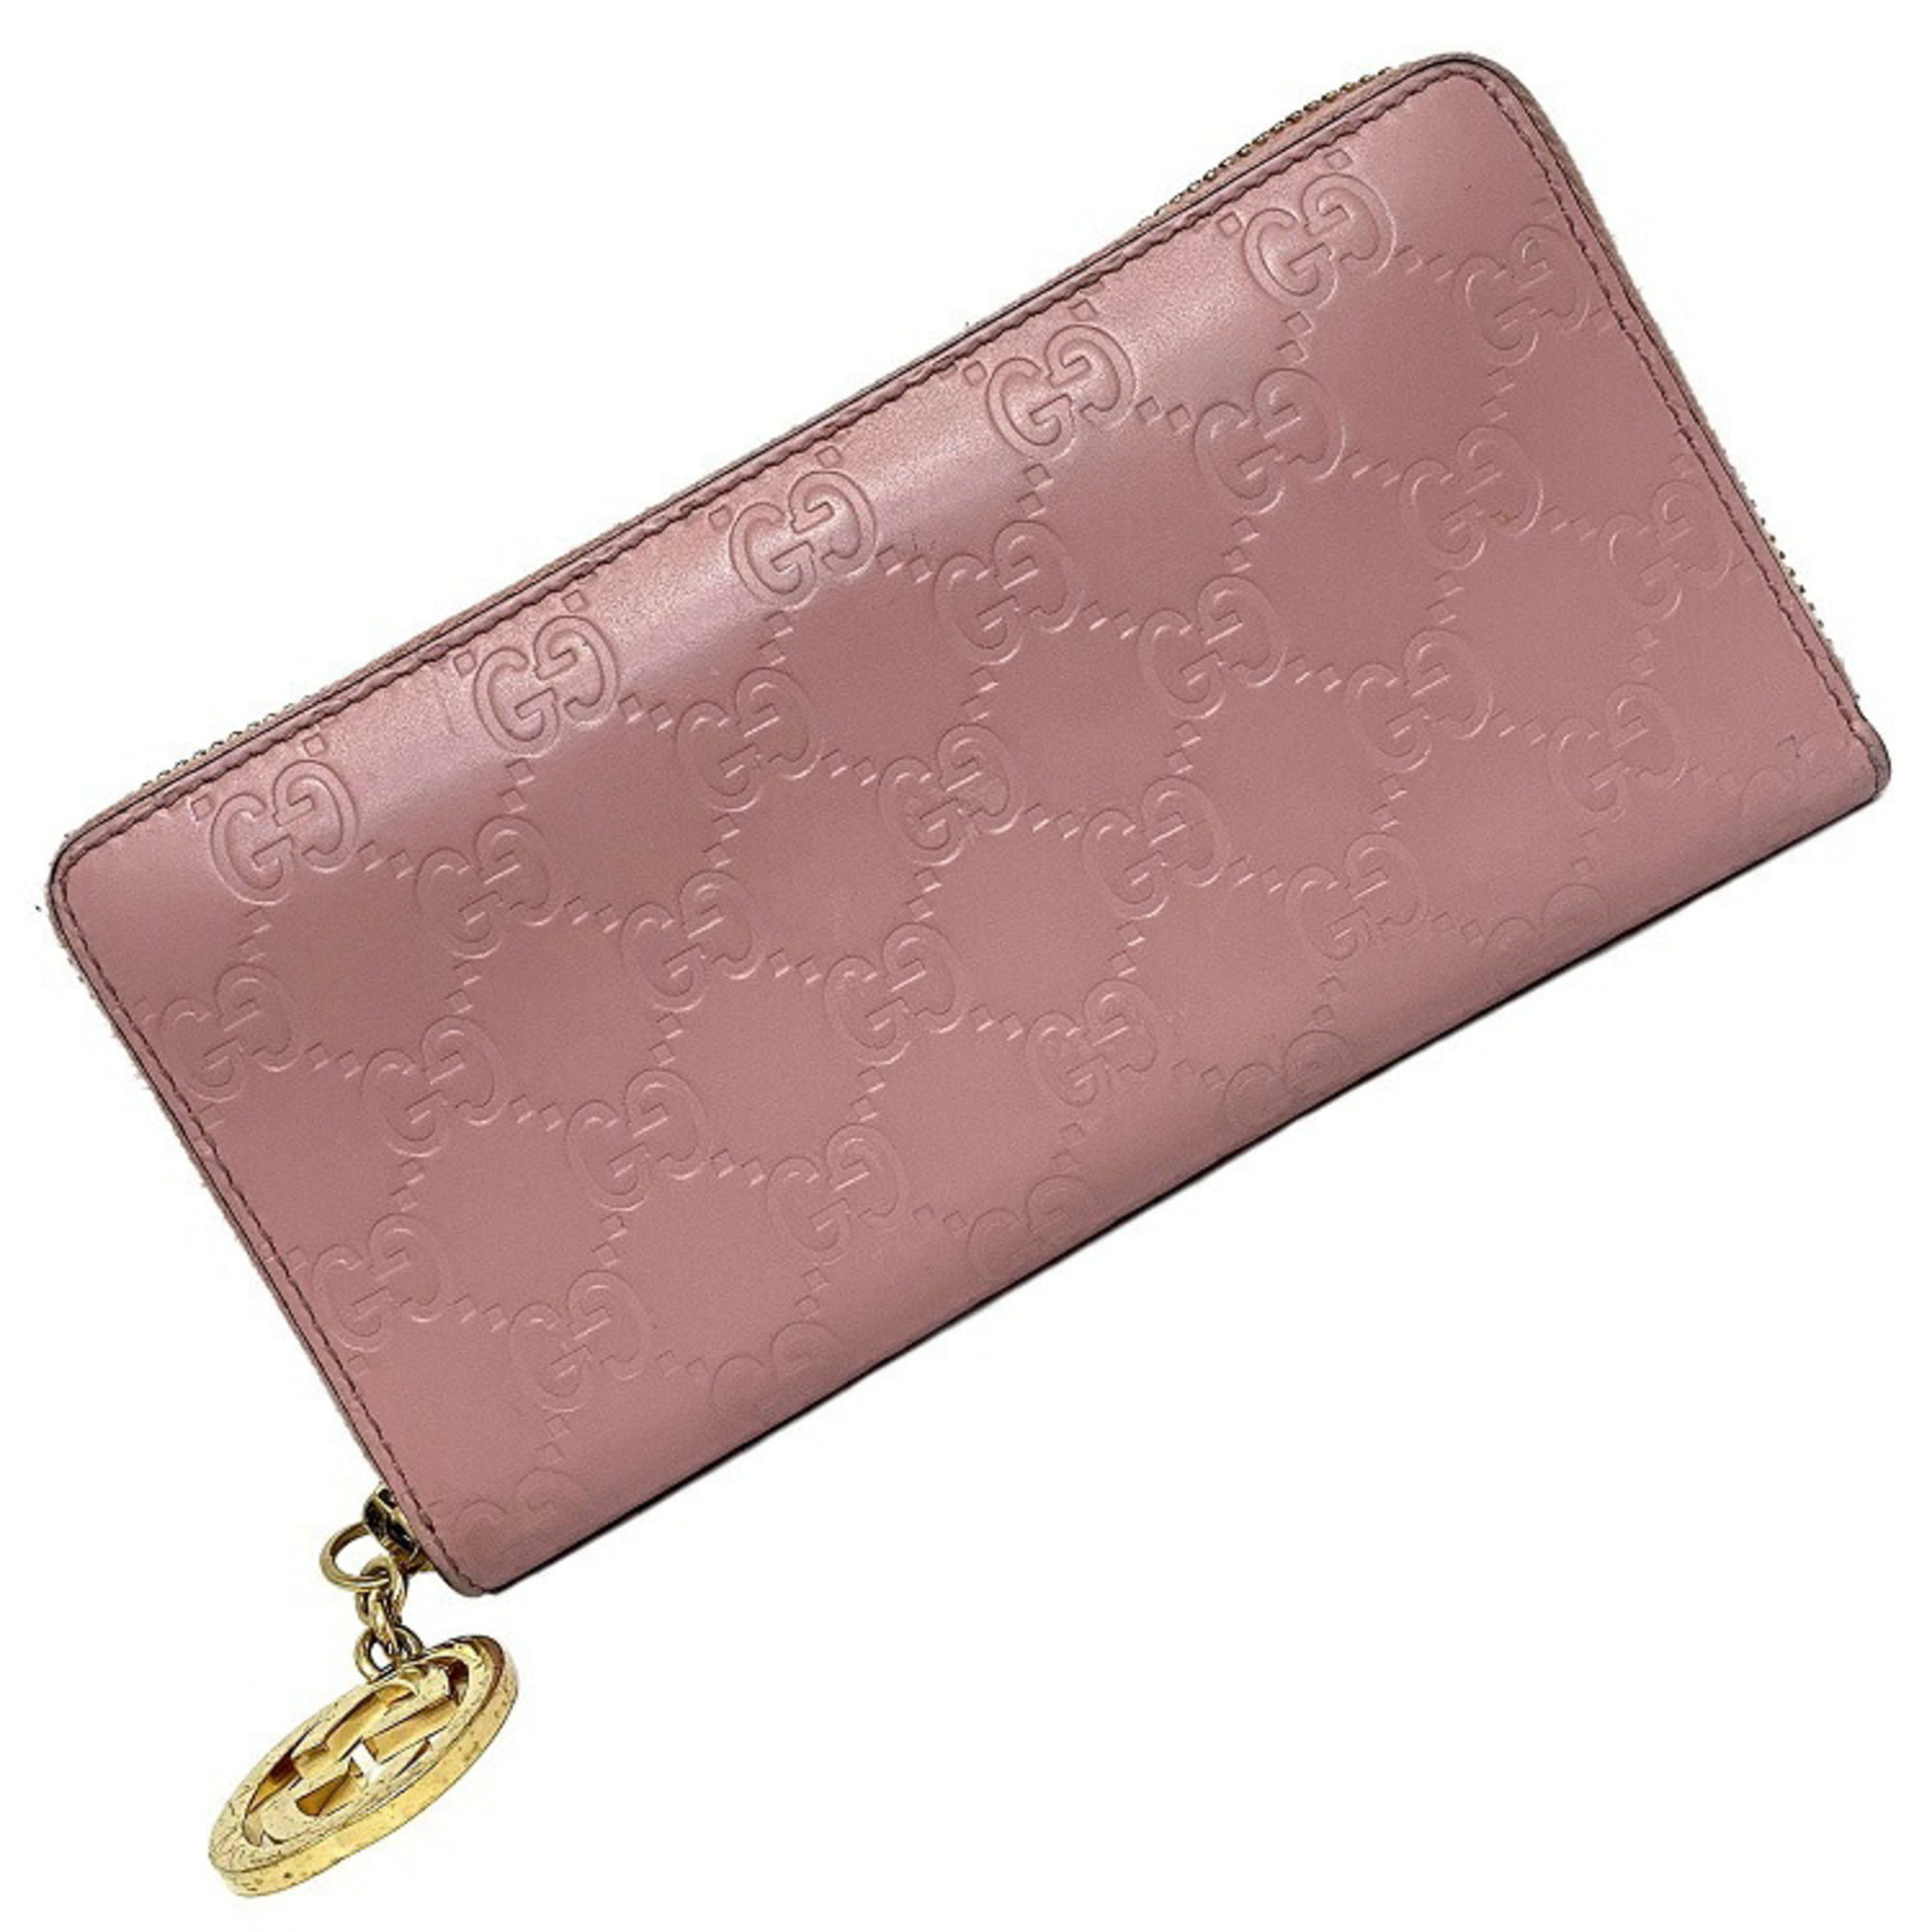 Used Gucci Wallet Pink Gold Shimaline 409342 Leather GUCCI Interlocking  Charm Women's 